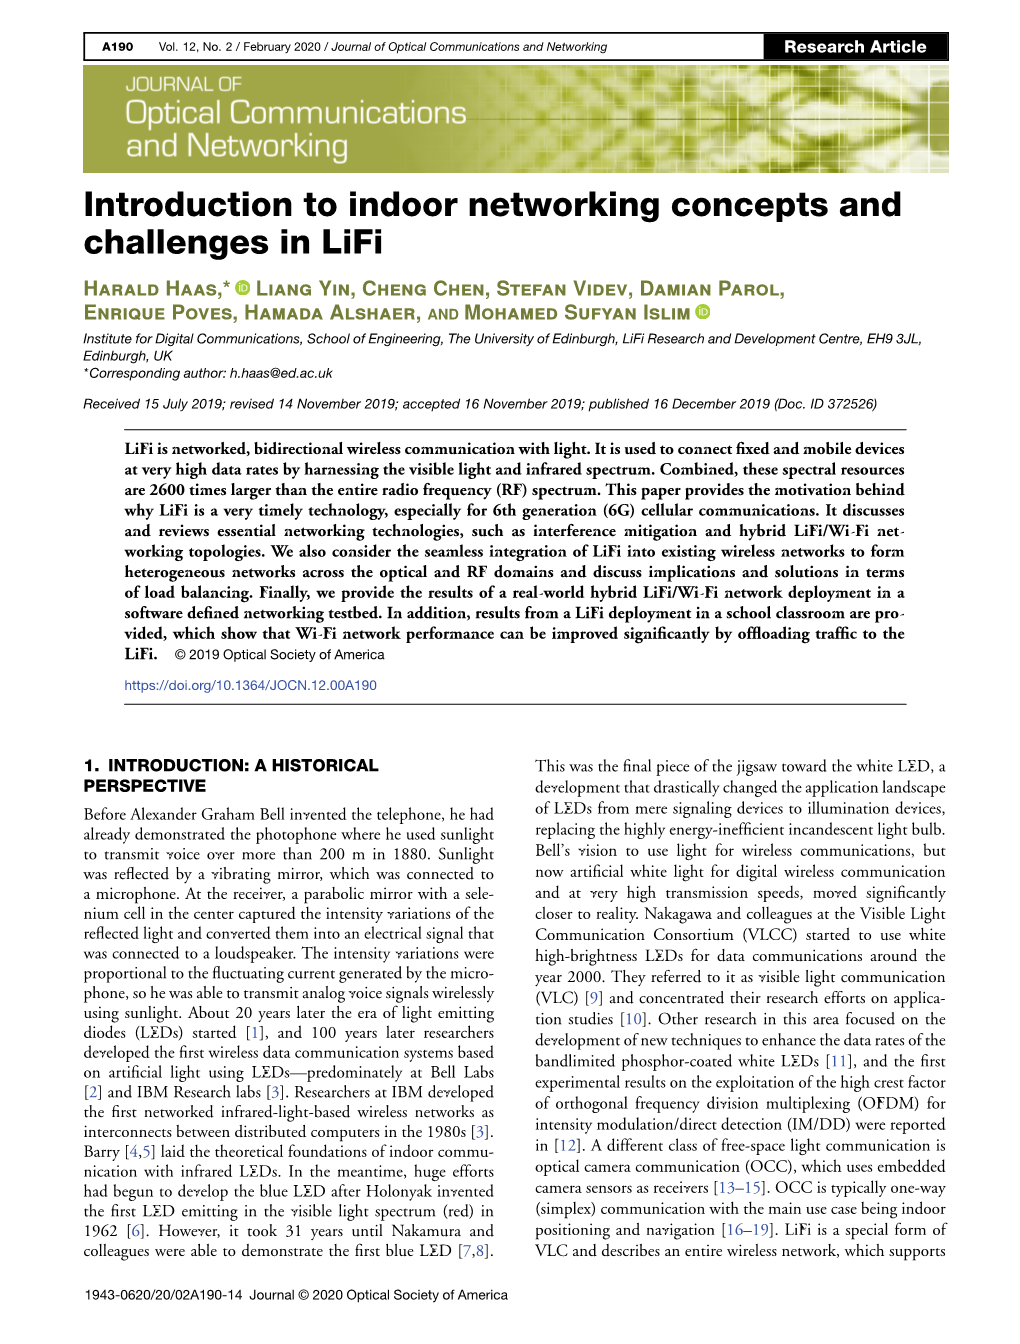 Introduction to Indoor Networking Concepts and Challenges in Lifi